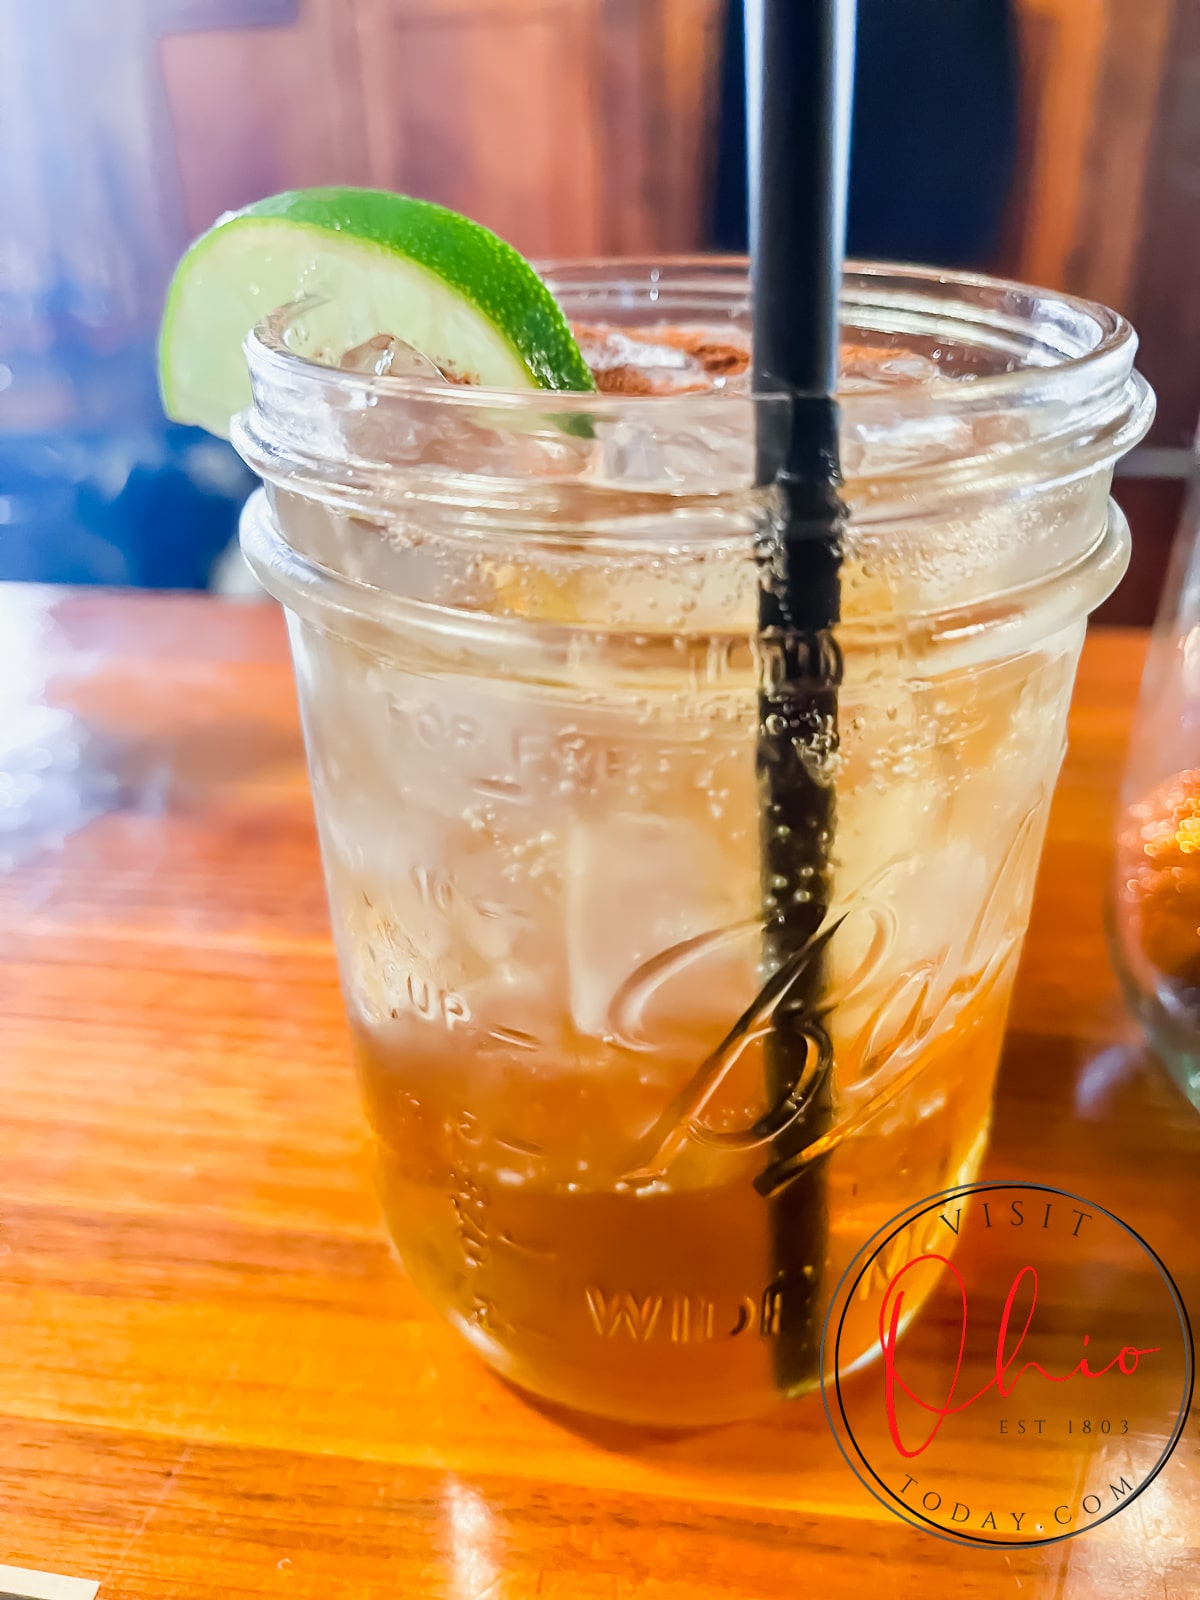 mason jar filled with ice, clear liquid and brown liquid with a black straw and a slice of lime from read eagle distillery